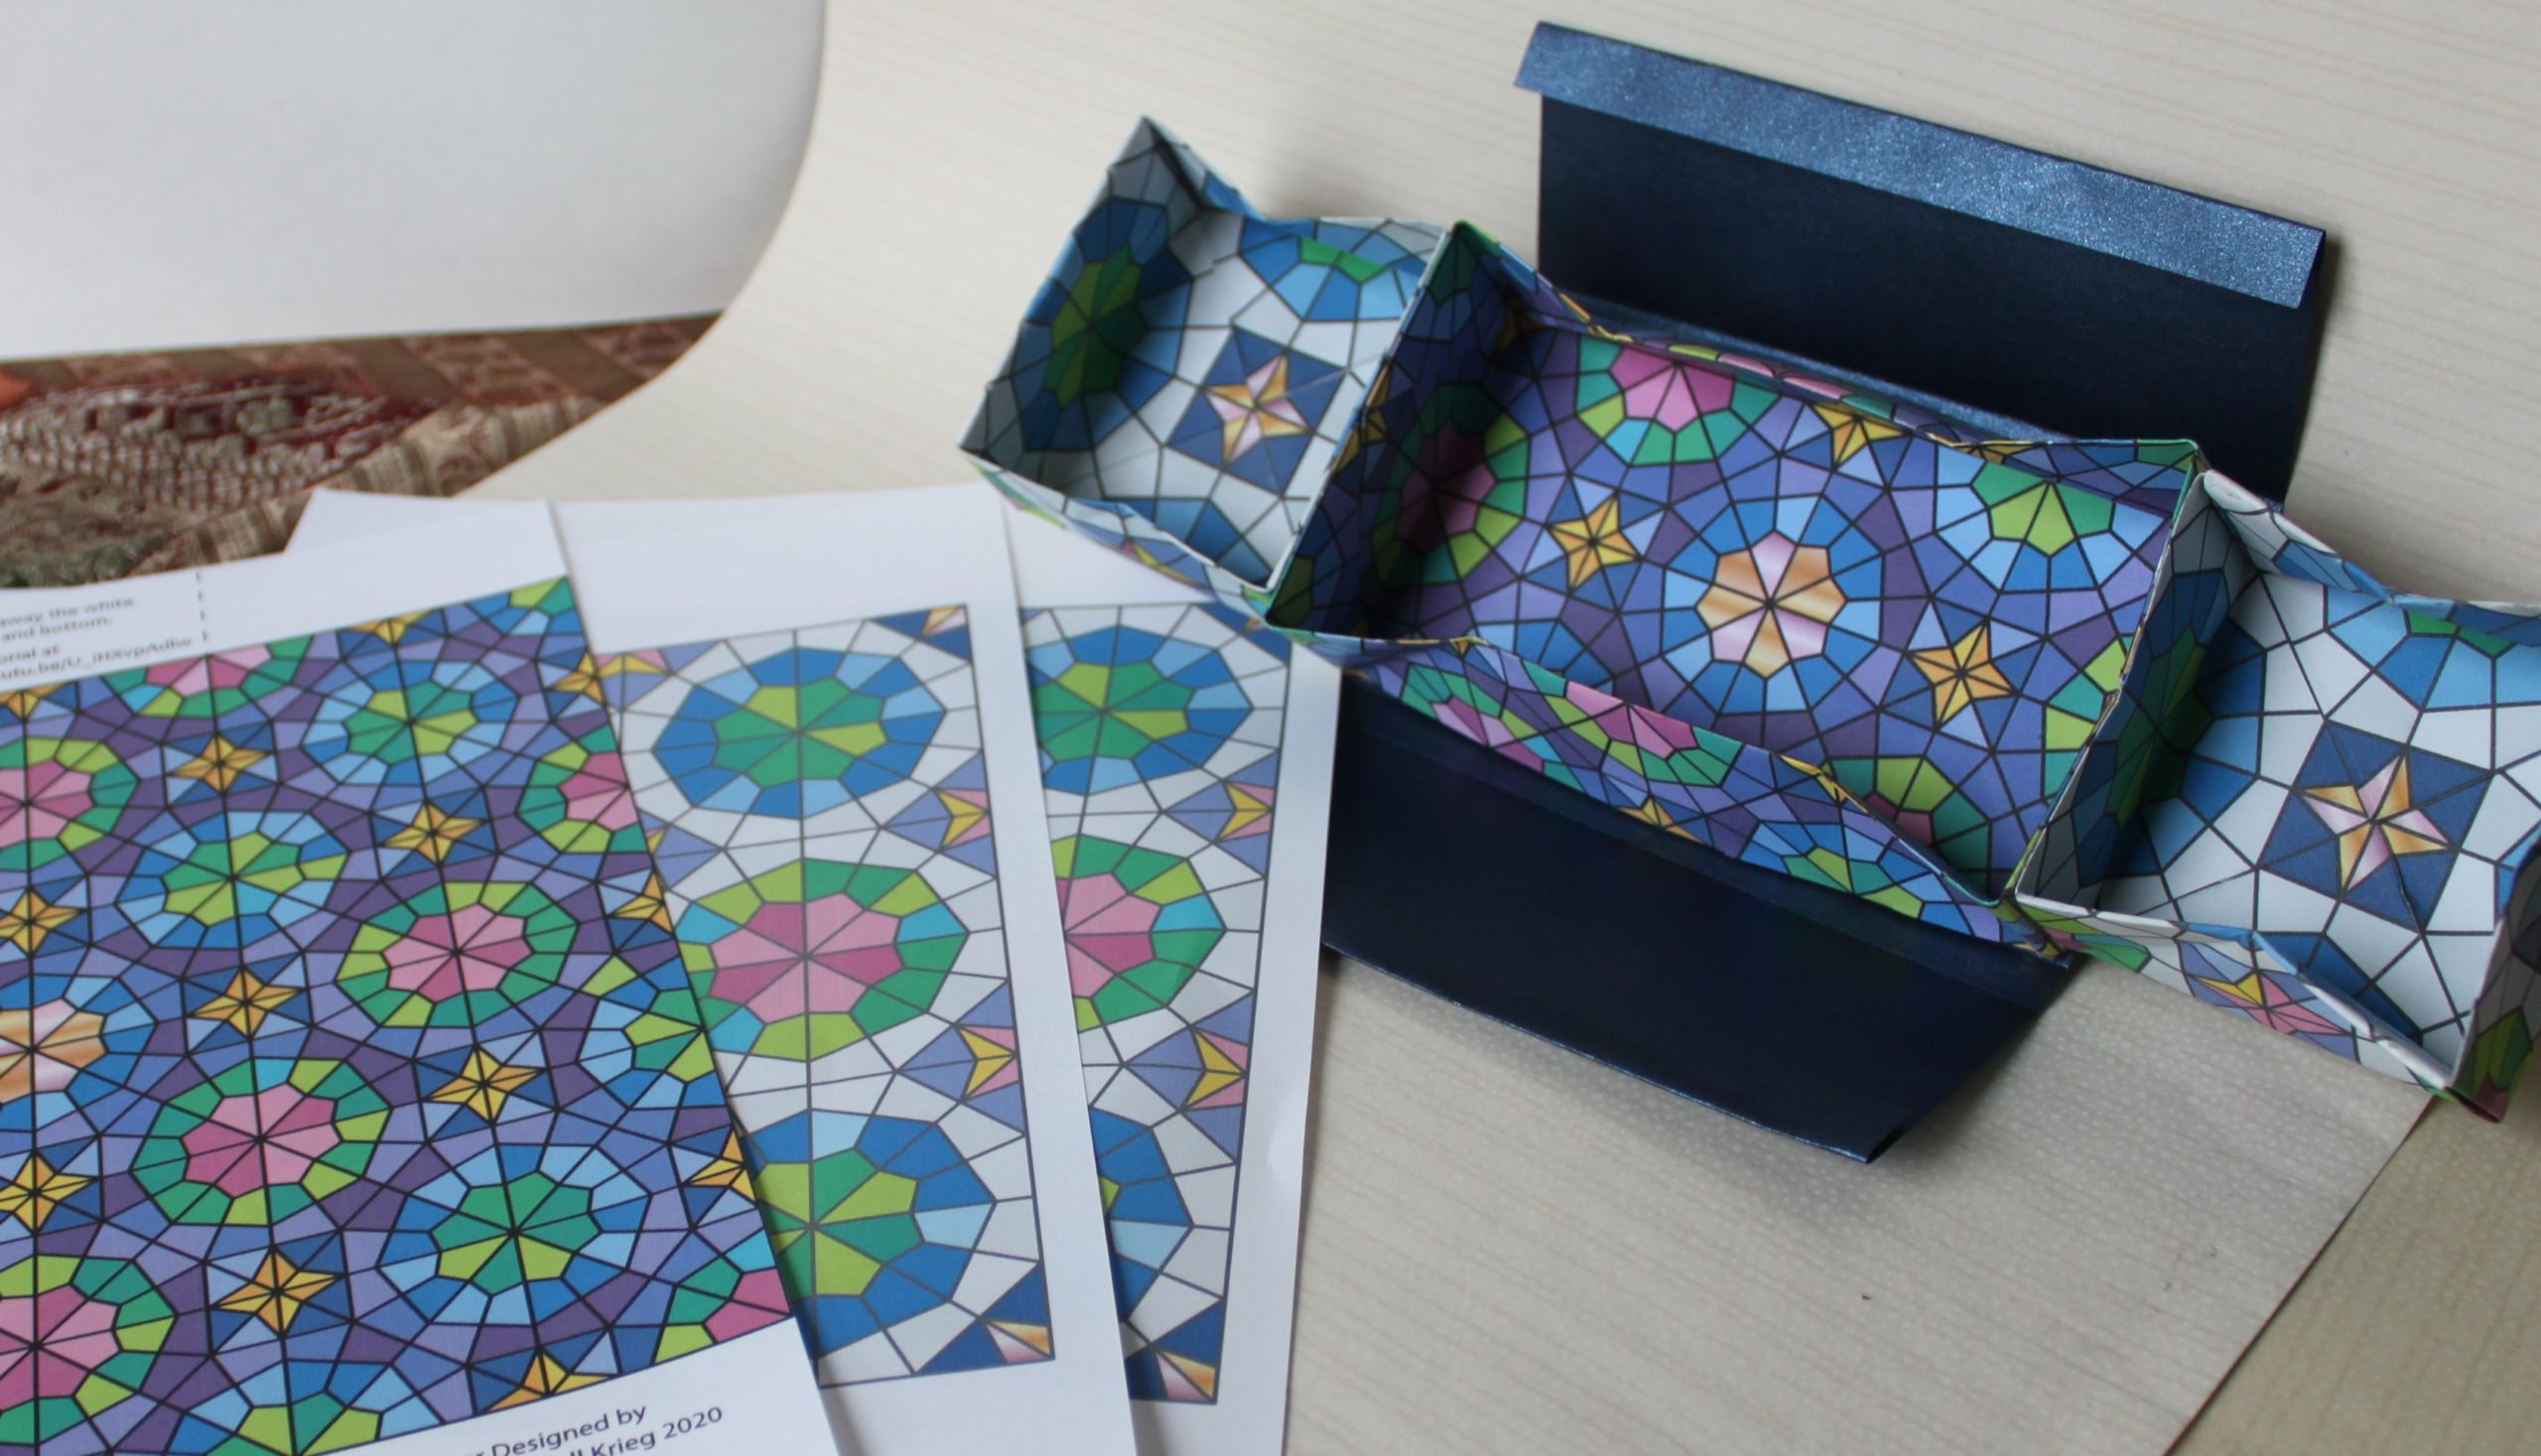 A colorful example of Paula's 3 hidden boxes structure. In the image are three sheets with colorful geometric patterns on them. These patterns are seen within the three hidden boxes.